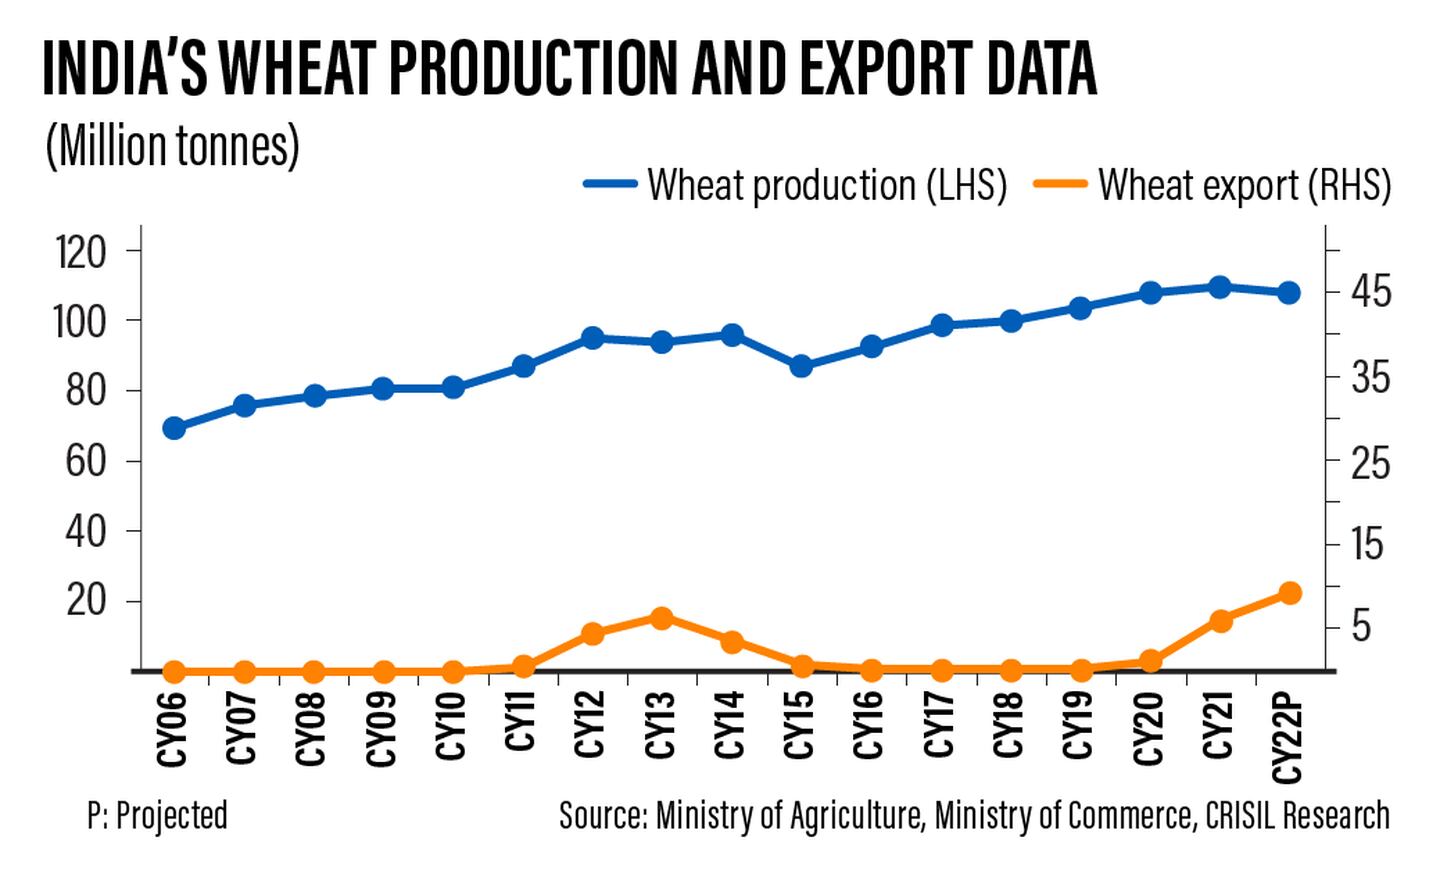 India’s wheat production